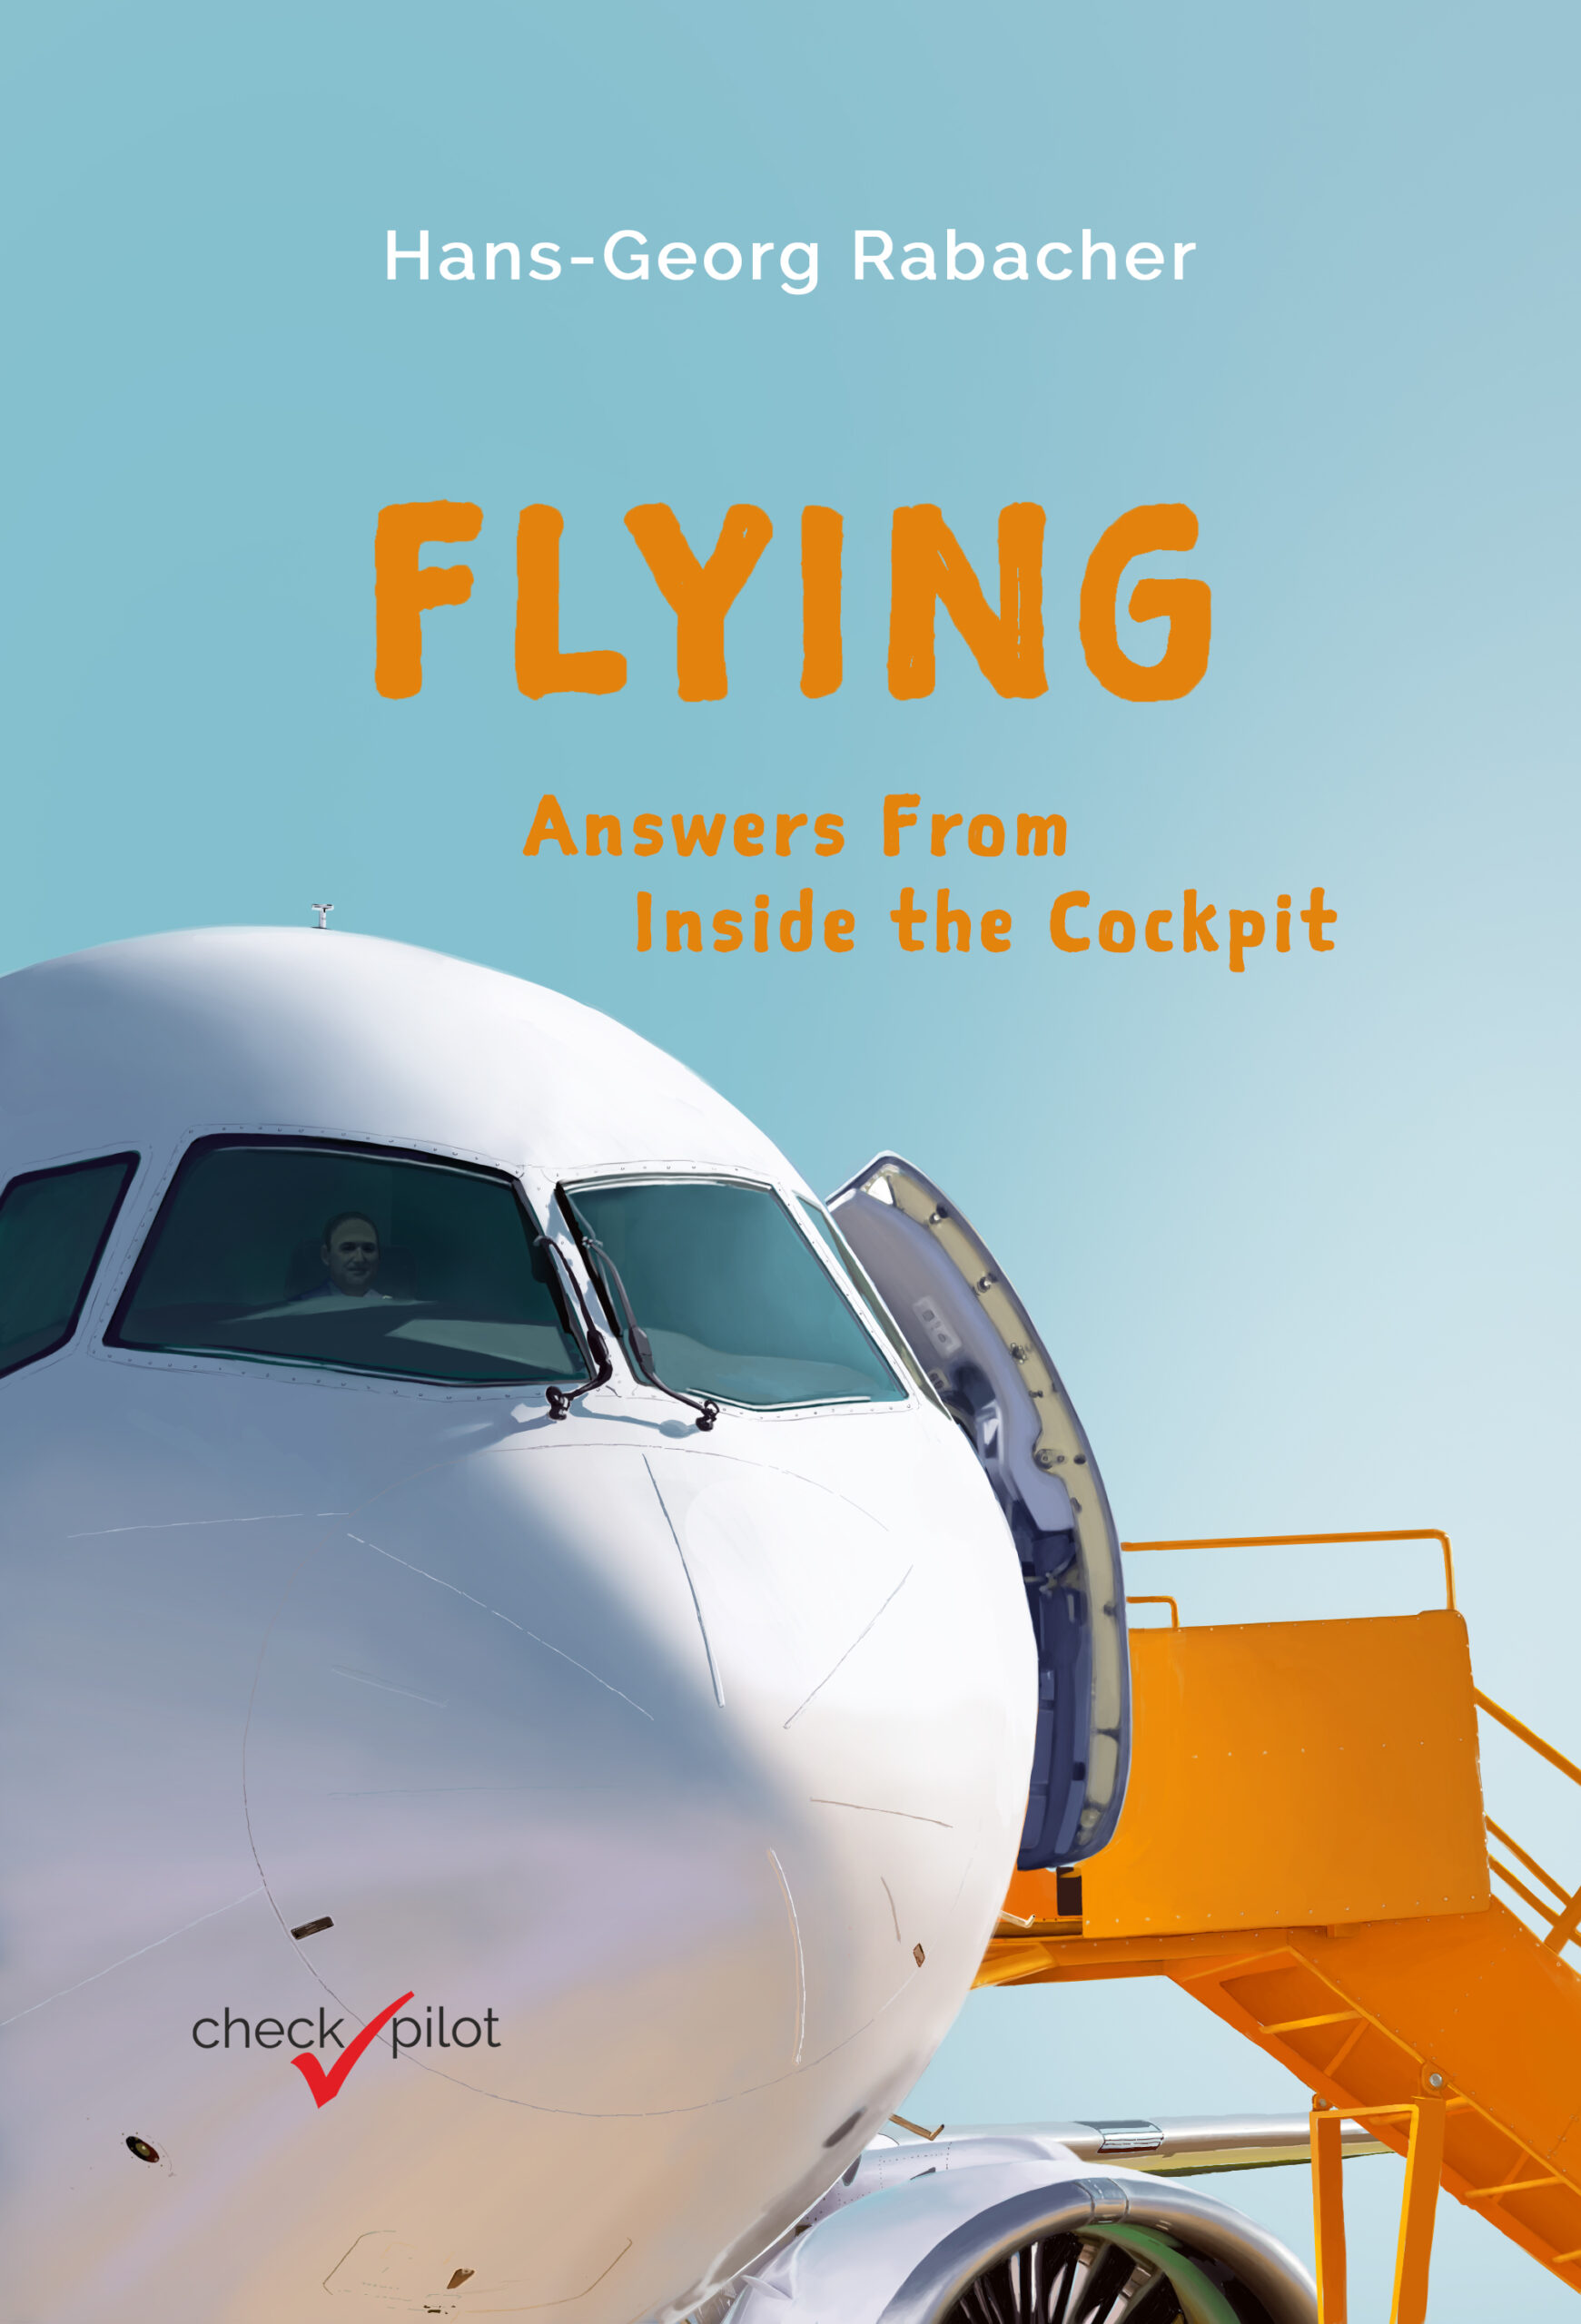 FREE: FLYING Answers From Inside the Cockpit by Hans-Georg Rabacher